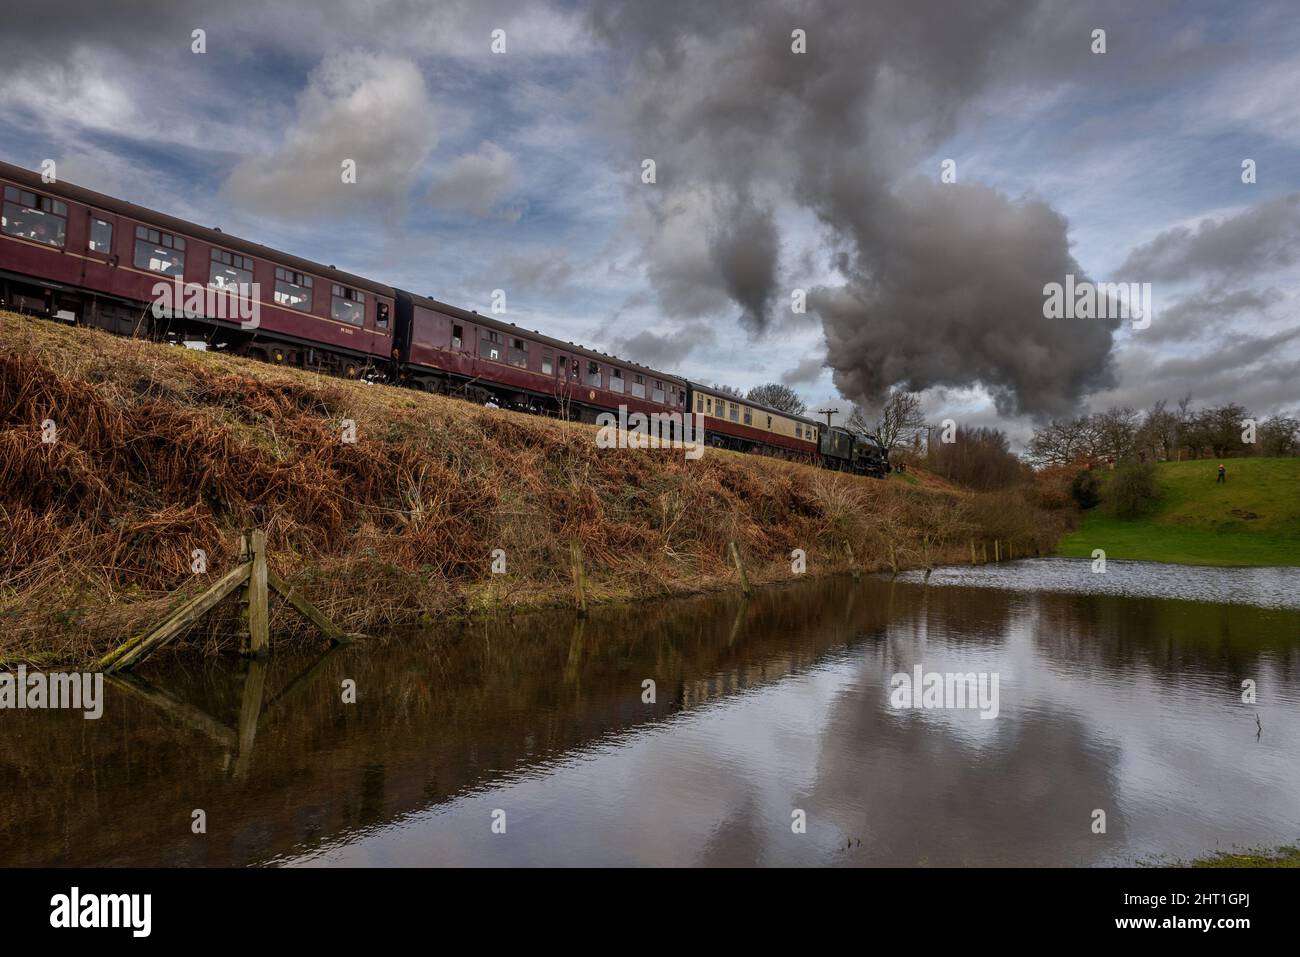 Bury, Greater Manchester, UK, Saturday February 26, 2022. The annual Spring Stream Gala on the East Lancashire Railway attracted hundreds of steam enthusiasts from all over the country to ride along the volunteer run railway. The star of the gala is the 4601 Royal Scot, making a special guest appearance. Credit: Paul Heyes/Alamy News Live Stock Photo